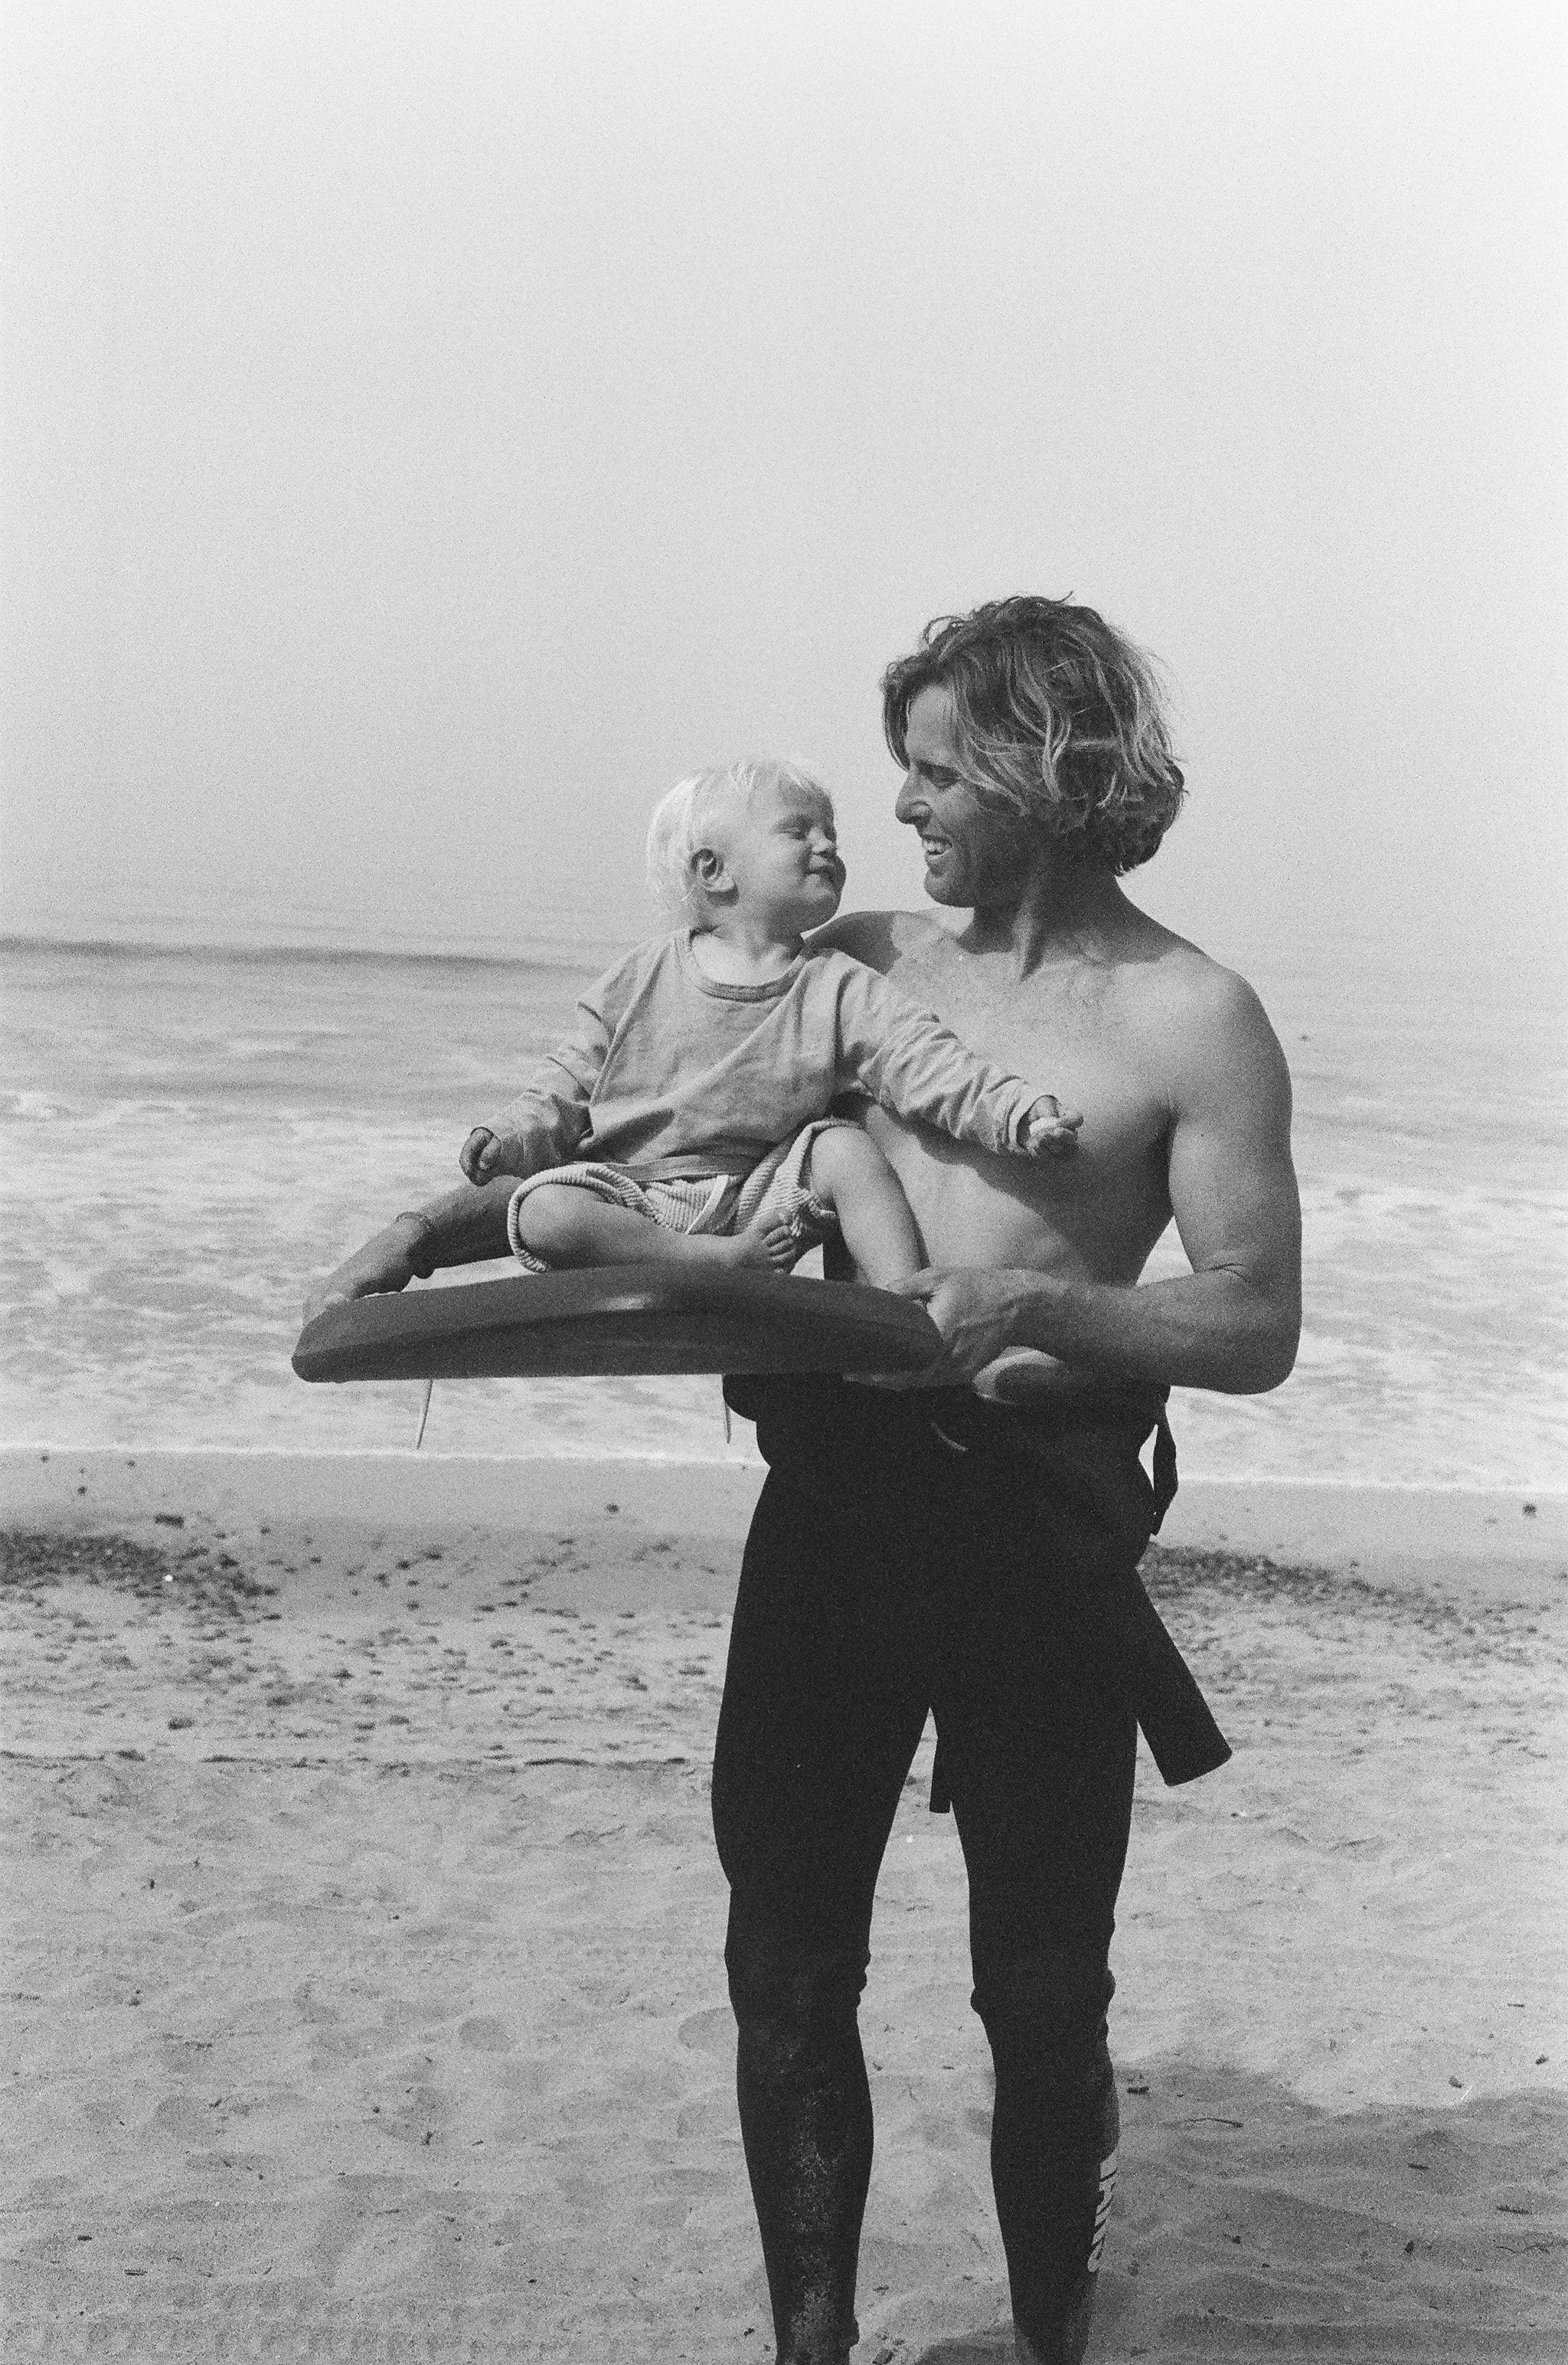 A man on a beach holding a child sitting on a Positive Vibe Warriors surfboard